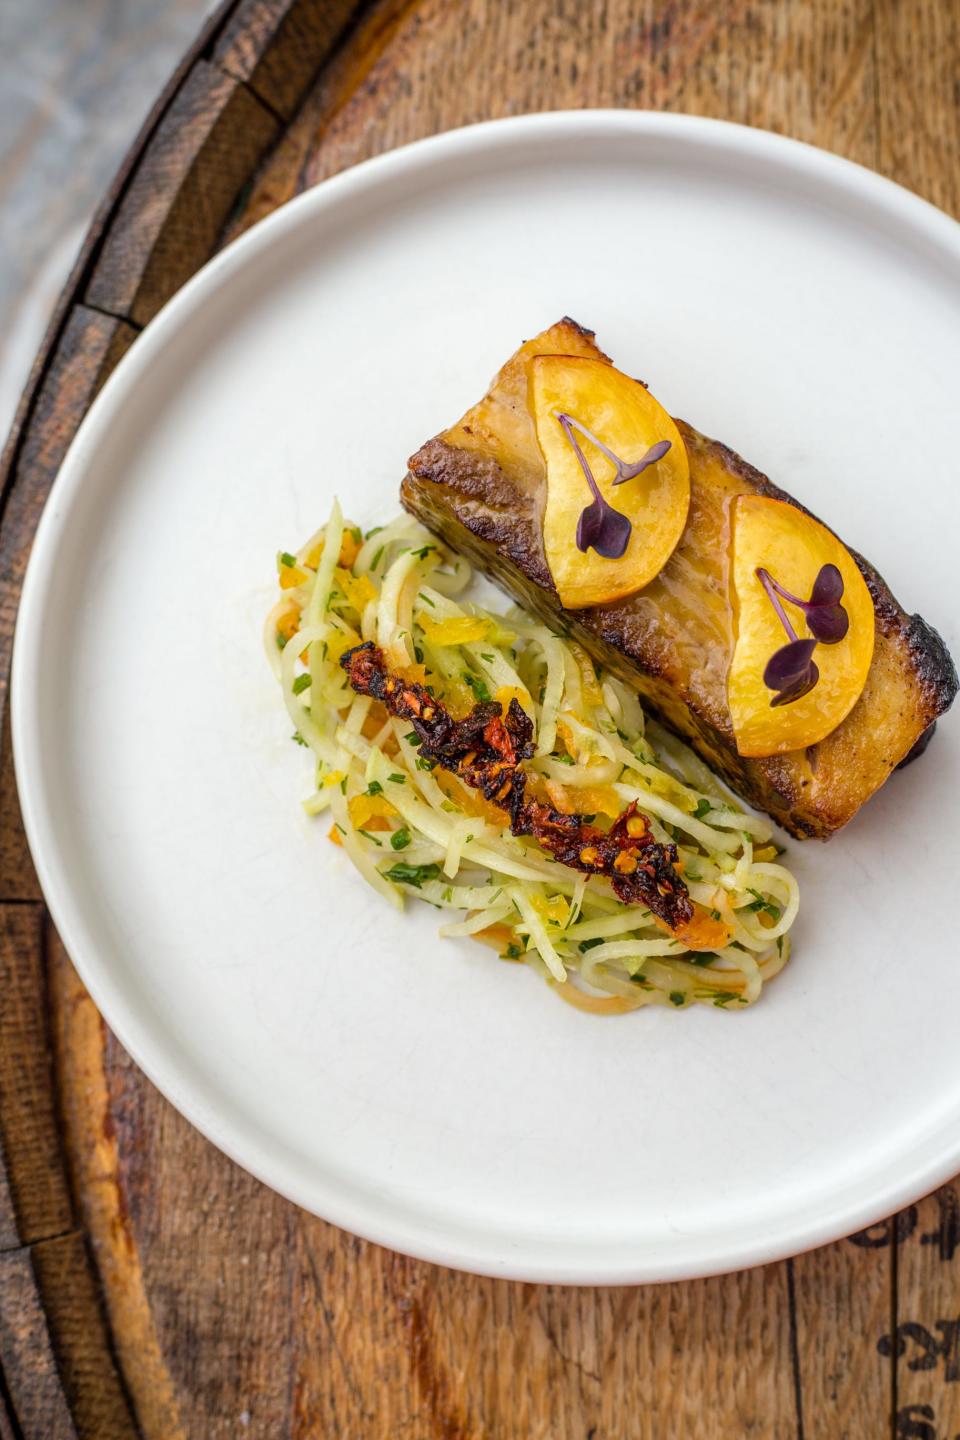 The Pork Belly at 610 Magnolia restaurant in Louisville features peach, apricot, kohlrabi, dill, and chili crunch.